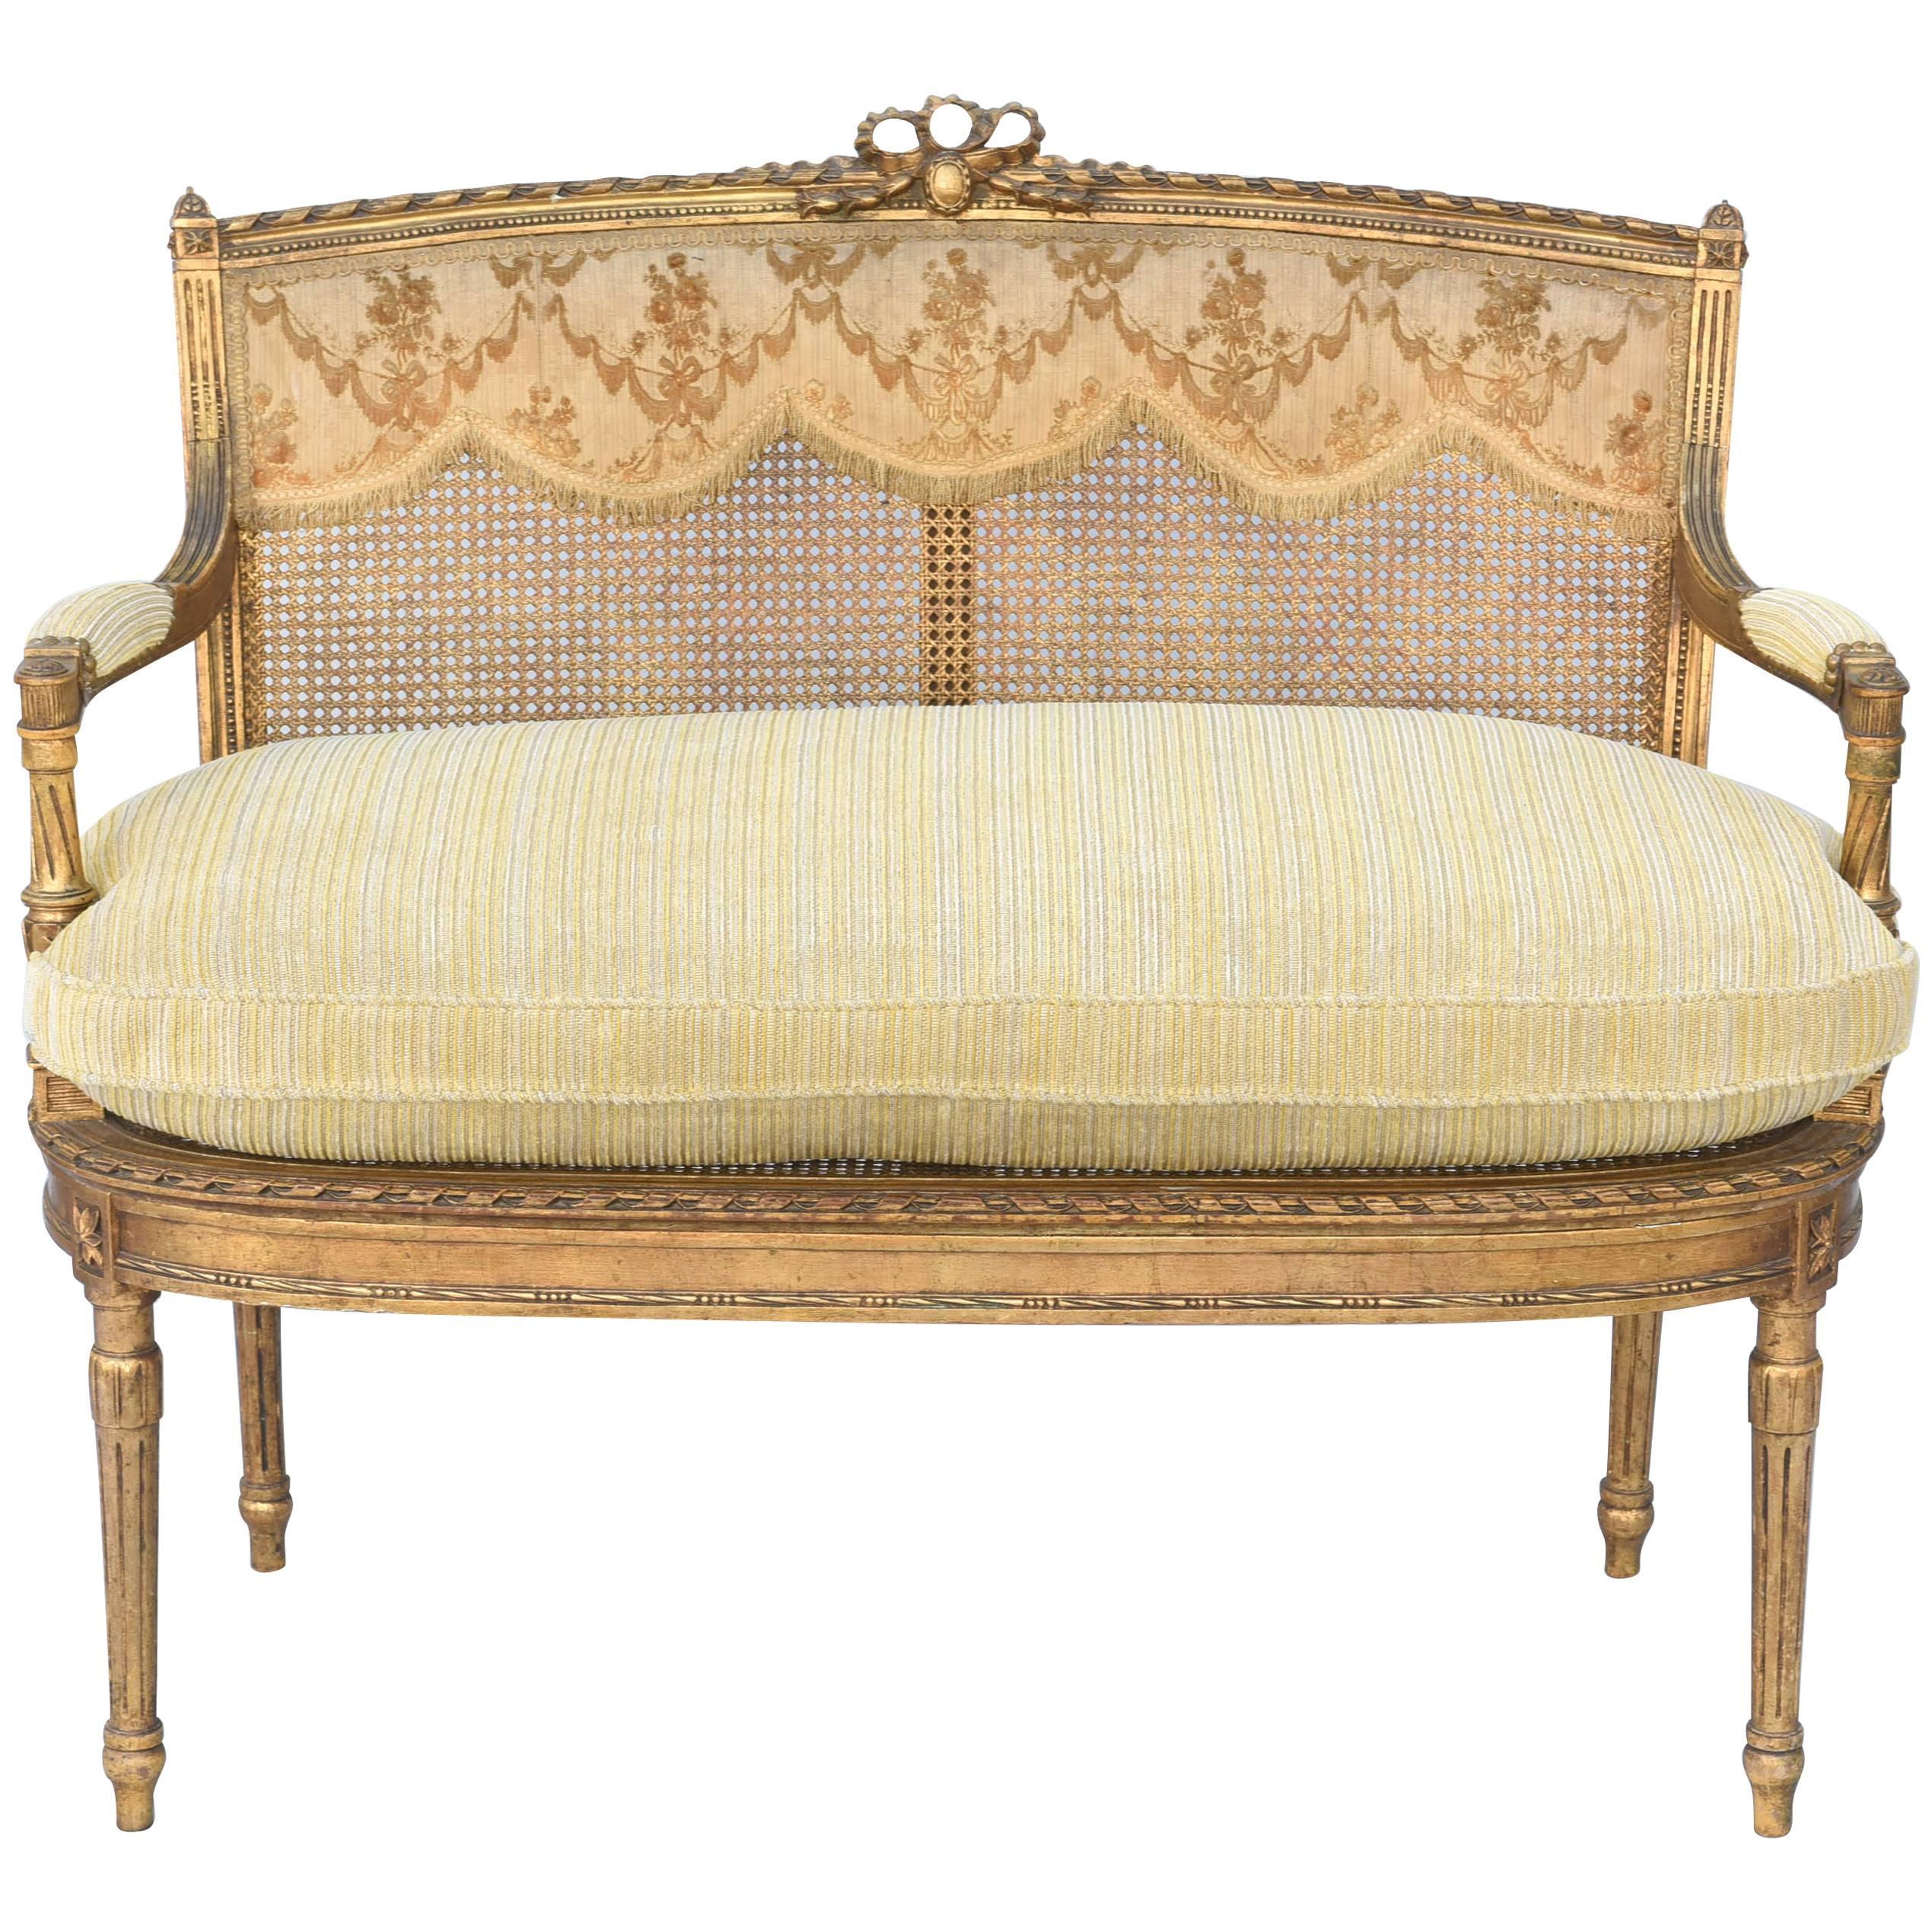 Fine 19th Century French Louis XVI Giltwood Settee with Caning 